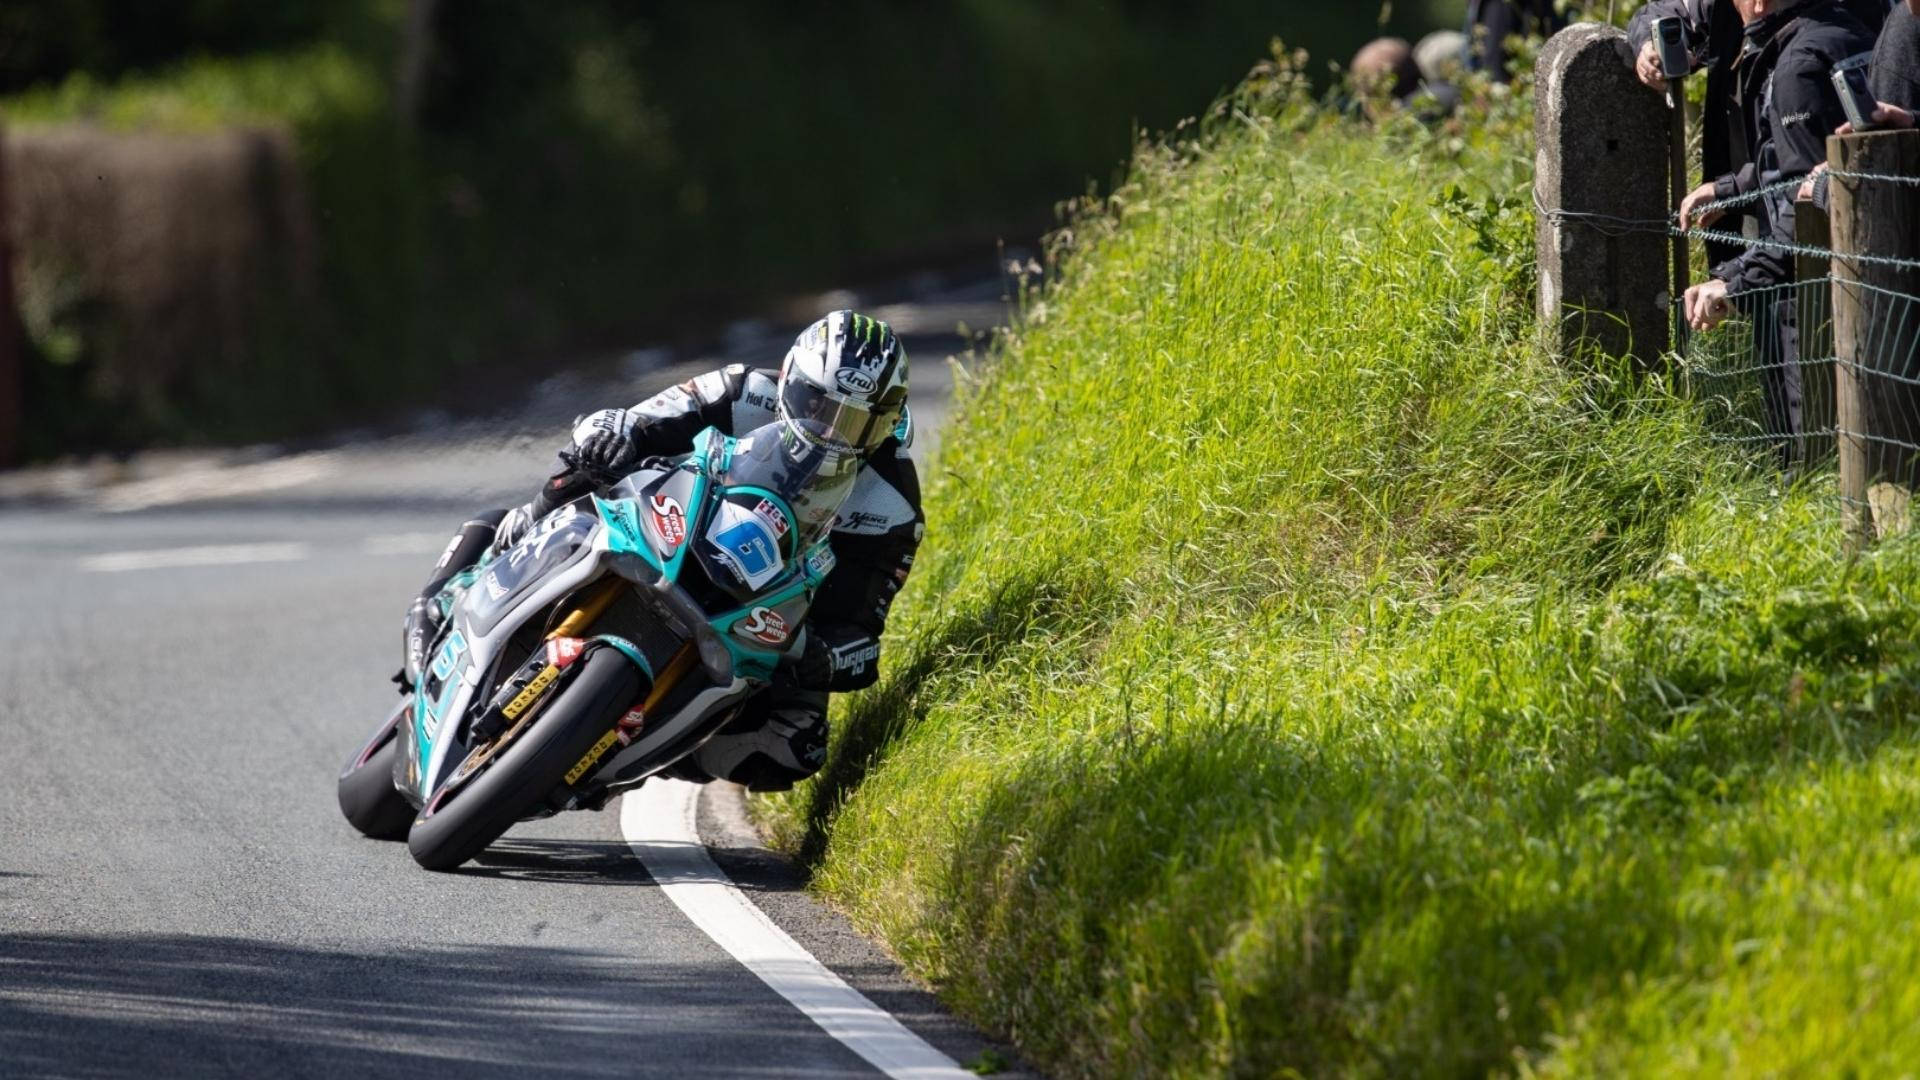 Thrilling Moments At The Isle Of Mann Motorcycle Race Background